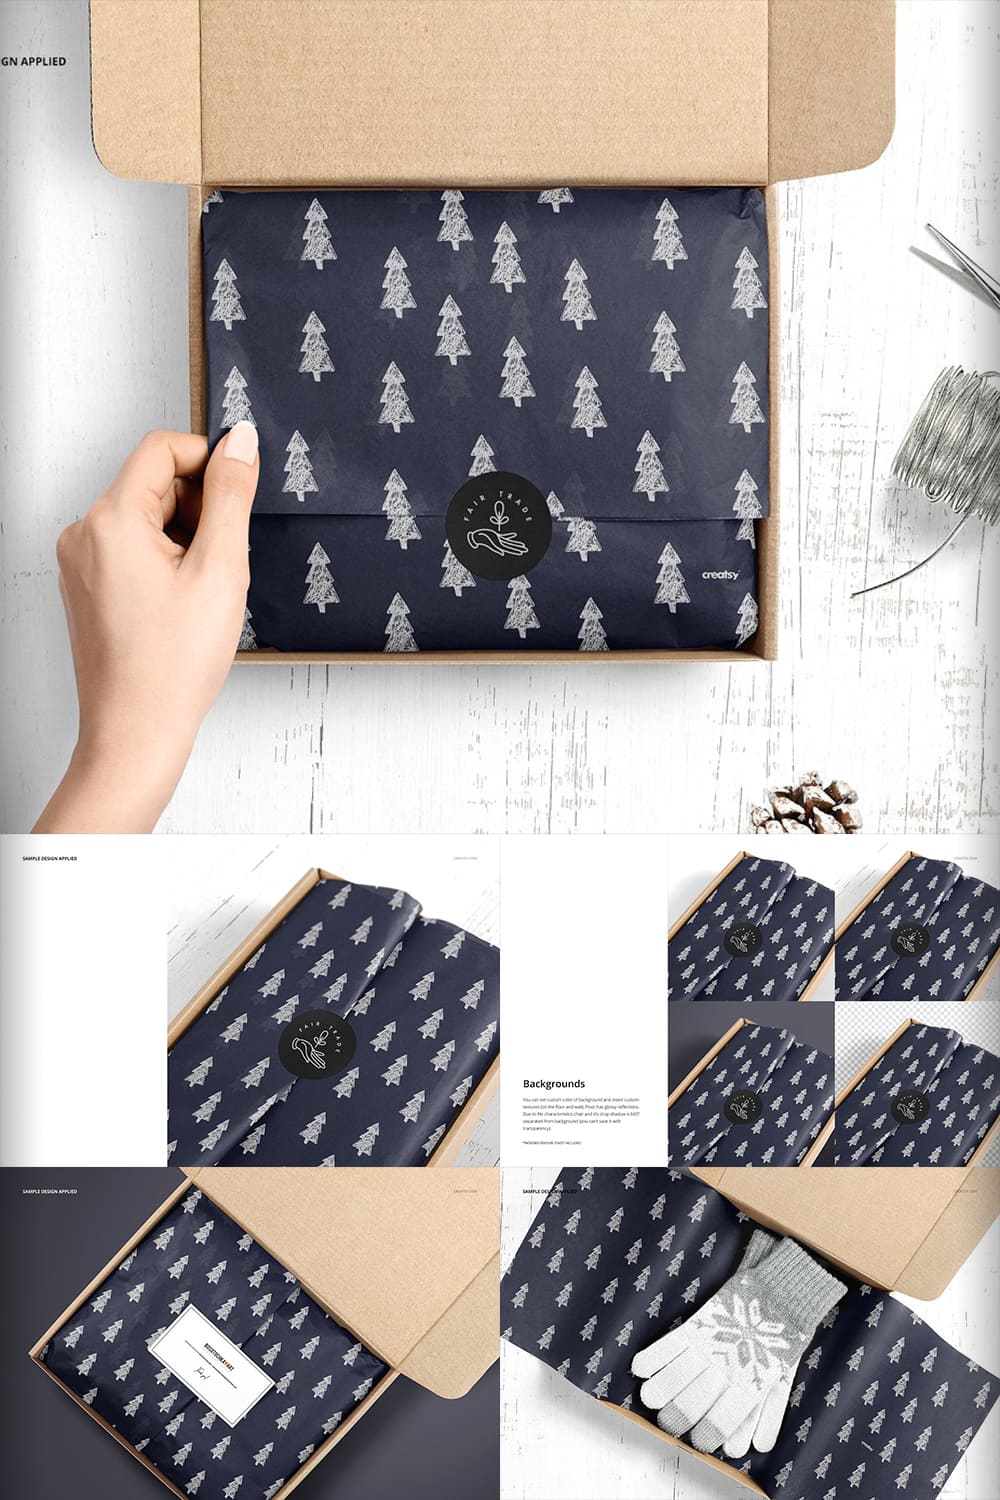 Black wrapper paper with white Christmas trees.